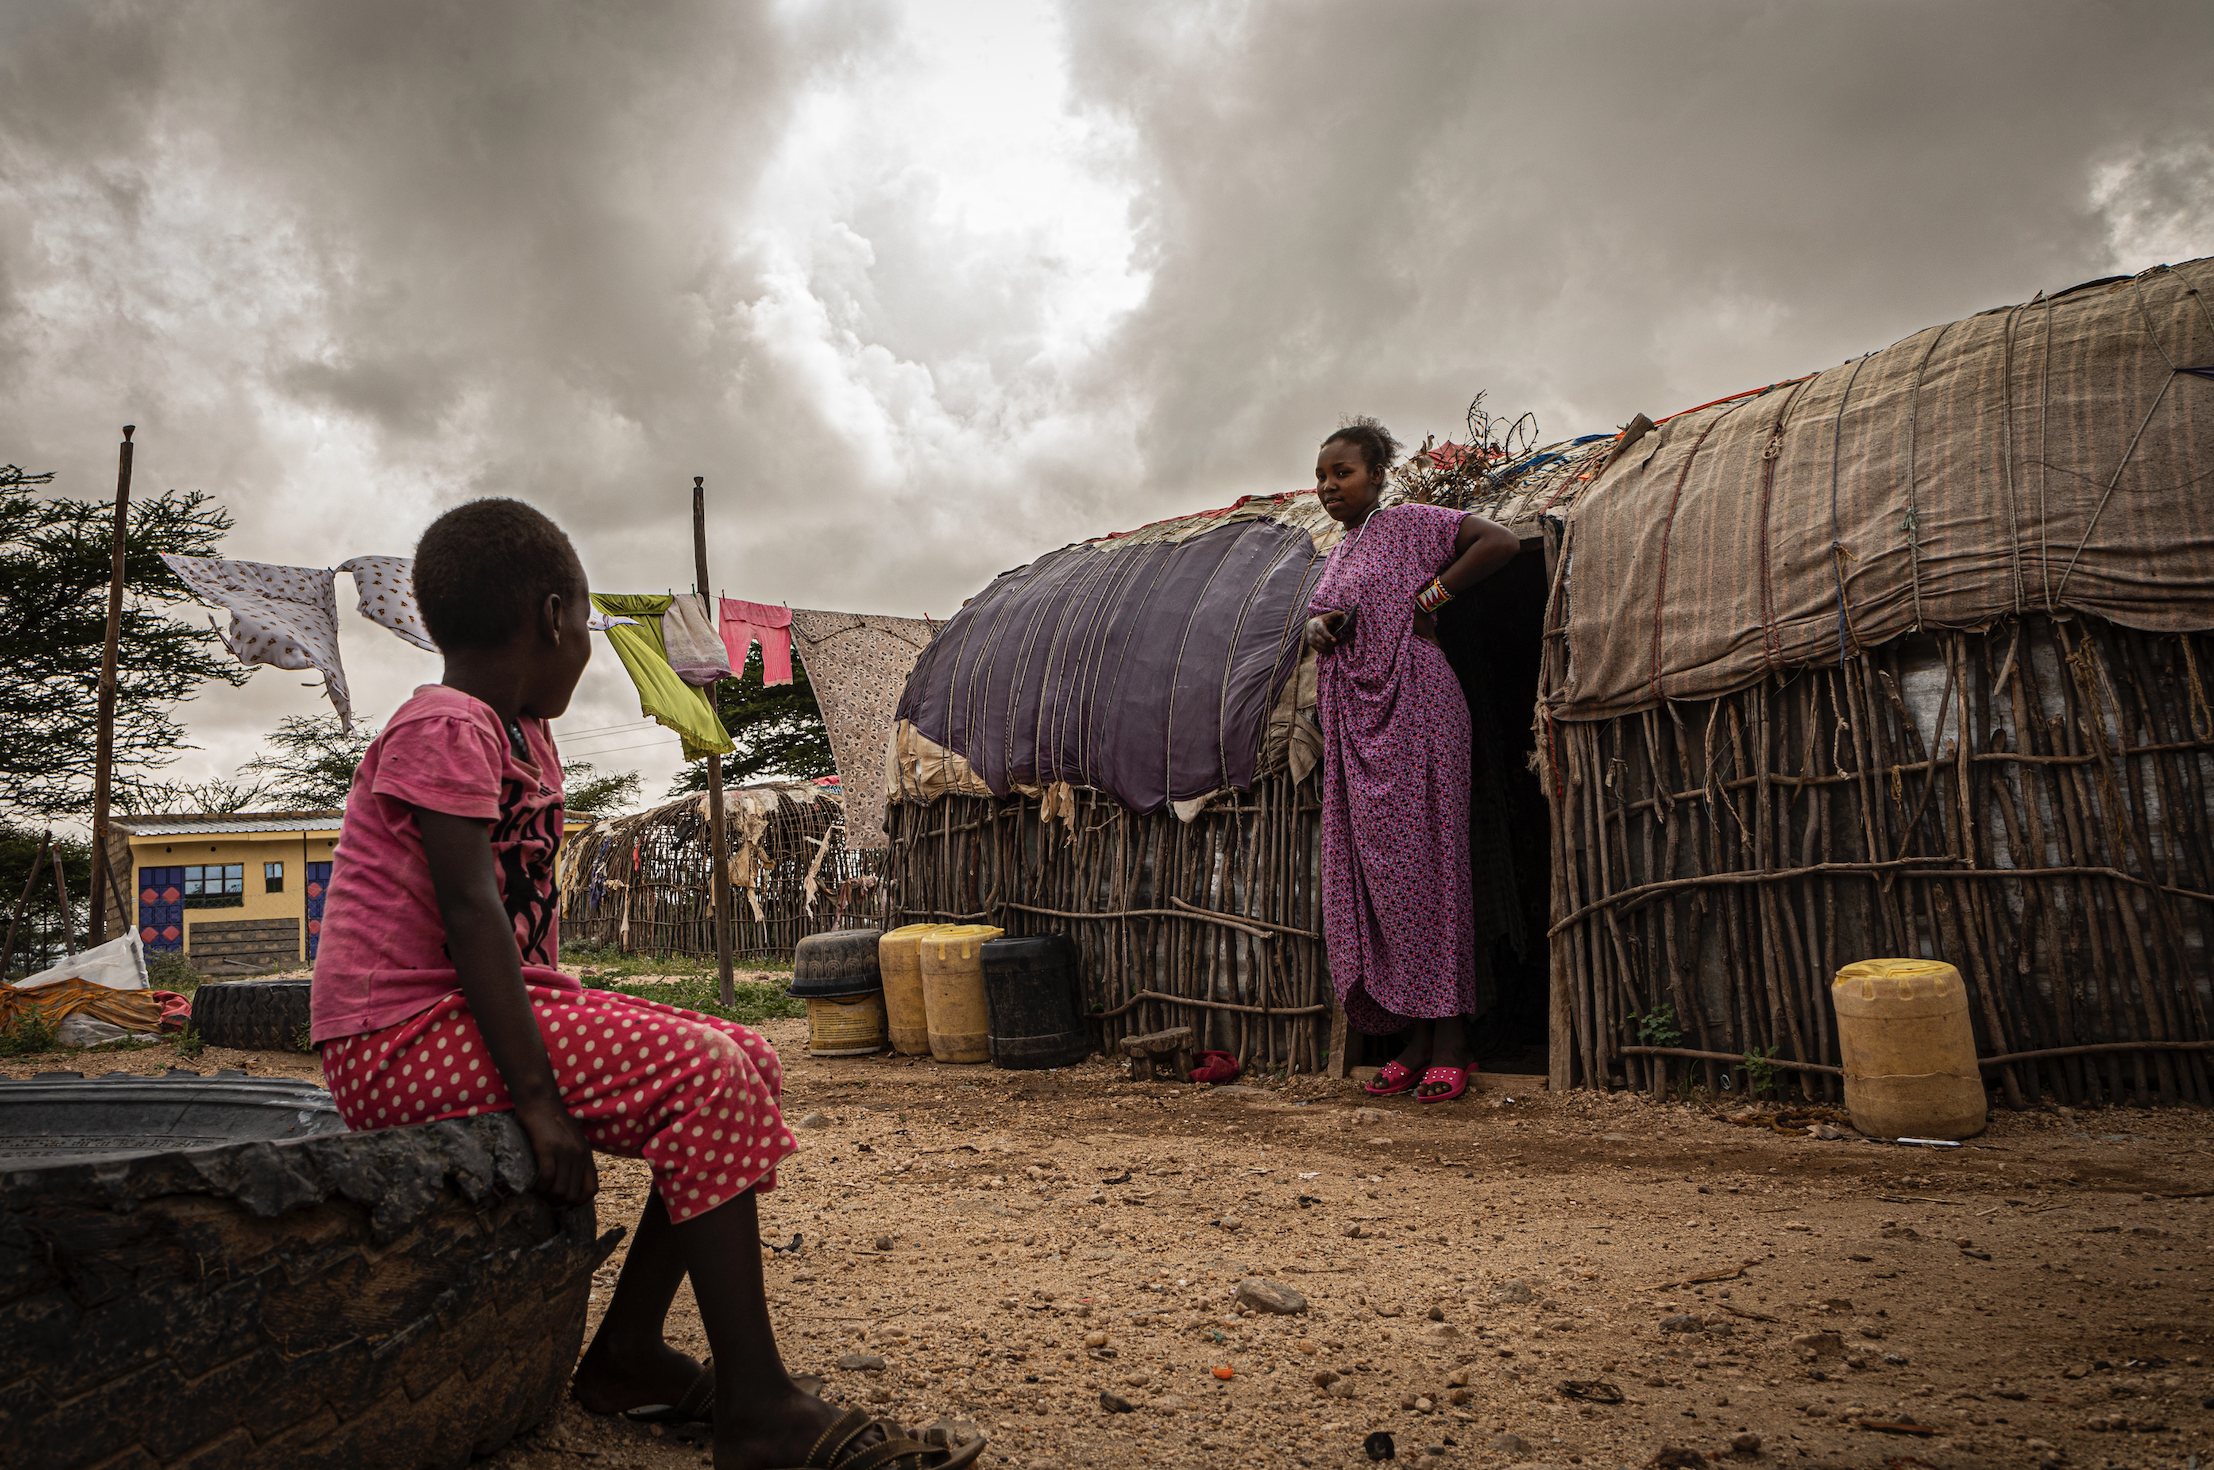 Vicky, 18, with her sister at their family home in Laisamis, Kenya. Image by Will Swanson. Kenya, 2020.